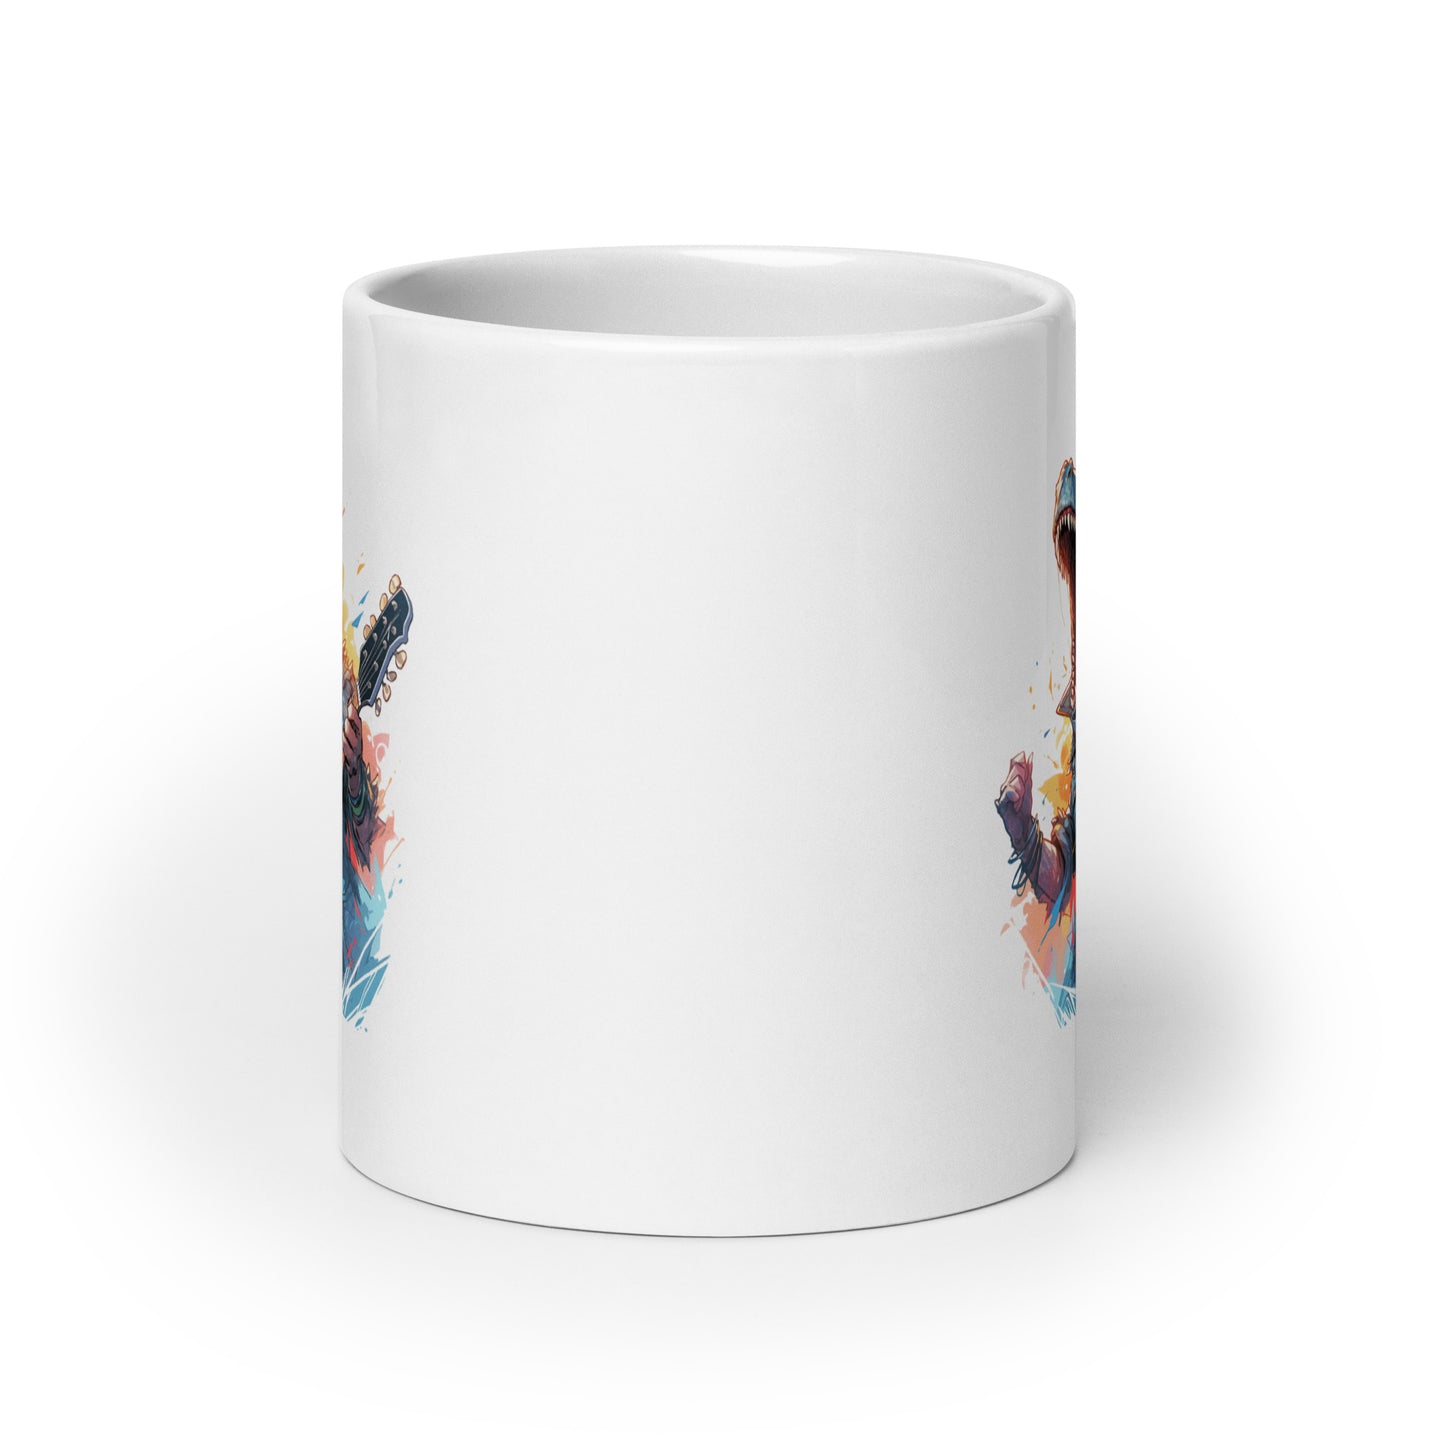 Dinosaur with guitar, Dino and sharp teeth of hard rock, Dragon rock and roll, Most music reptile in urban jungle - White glossy mug